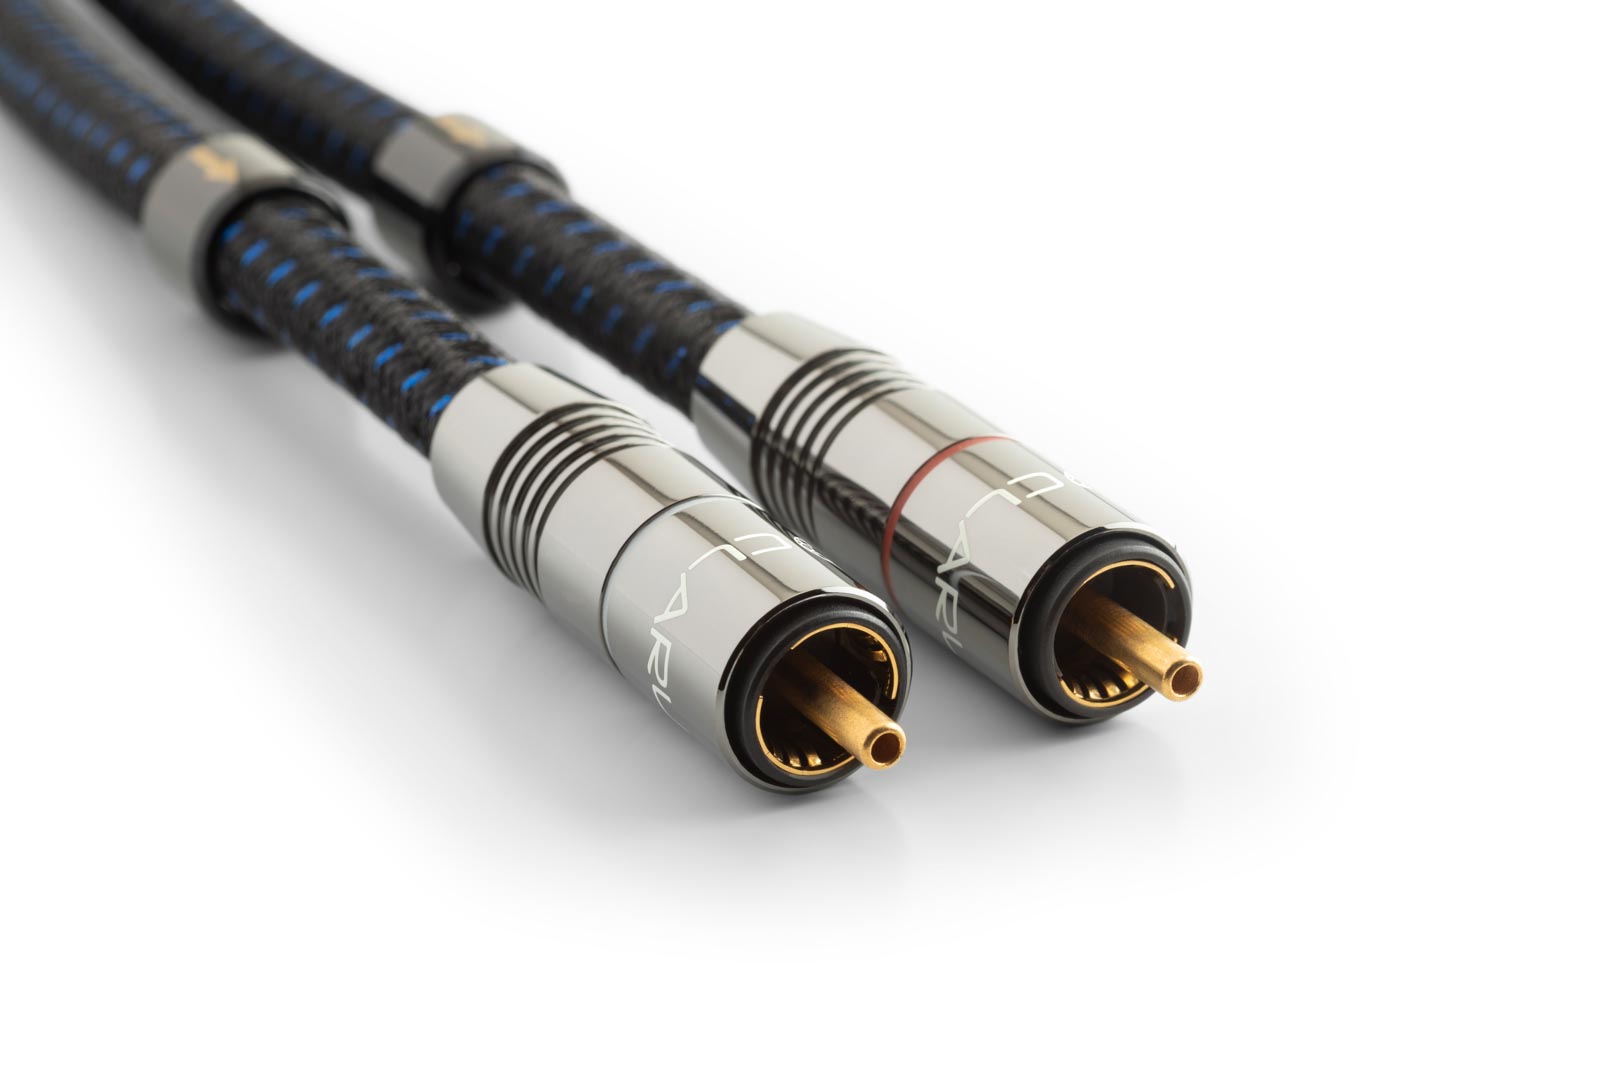 What Makes A Good Audio Cable